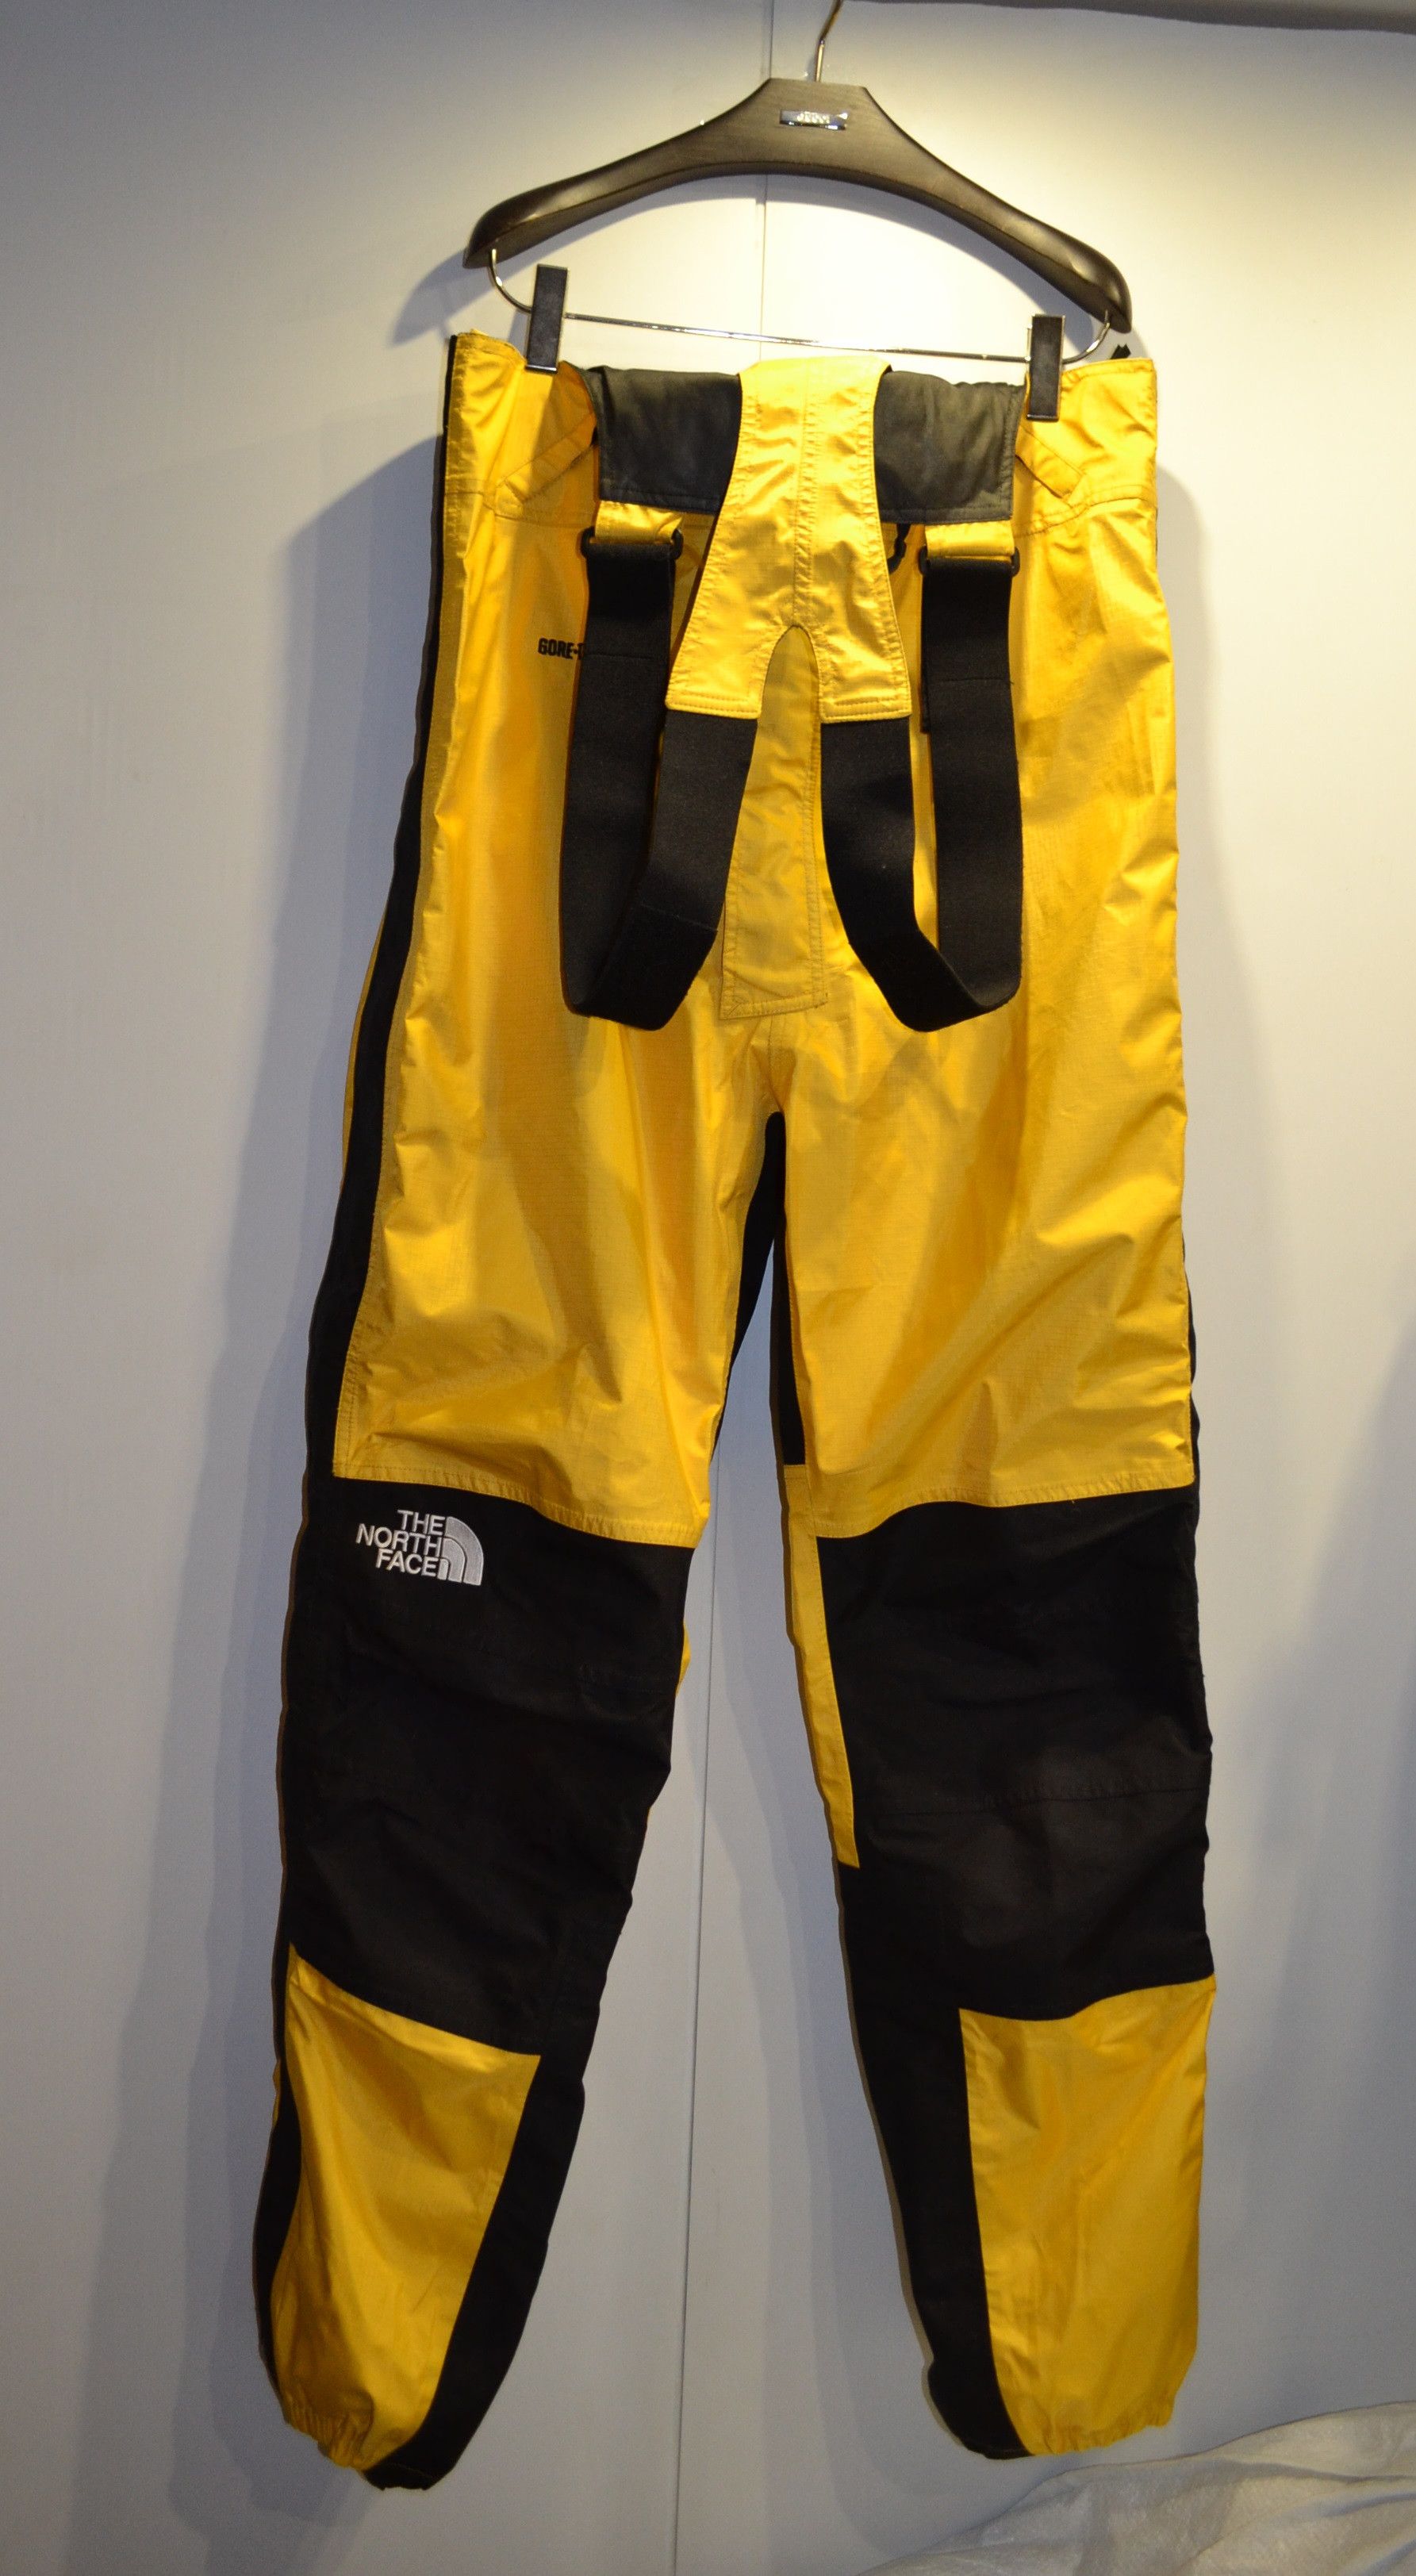 The North Face The North Face Vintage BIB XL Overall Yellow Ripstop Gore-tex Deadstock Winter Hardshell Suit Rare Supreme 90s piece Karakoram Salopette Size US 36 / EU 52 - 1 Preview